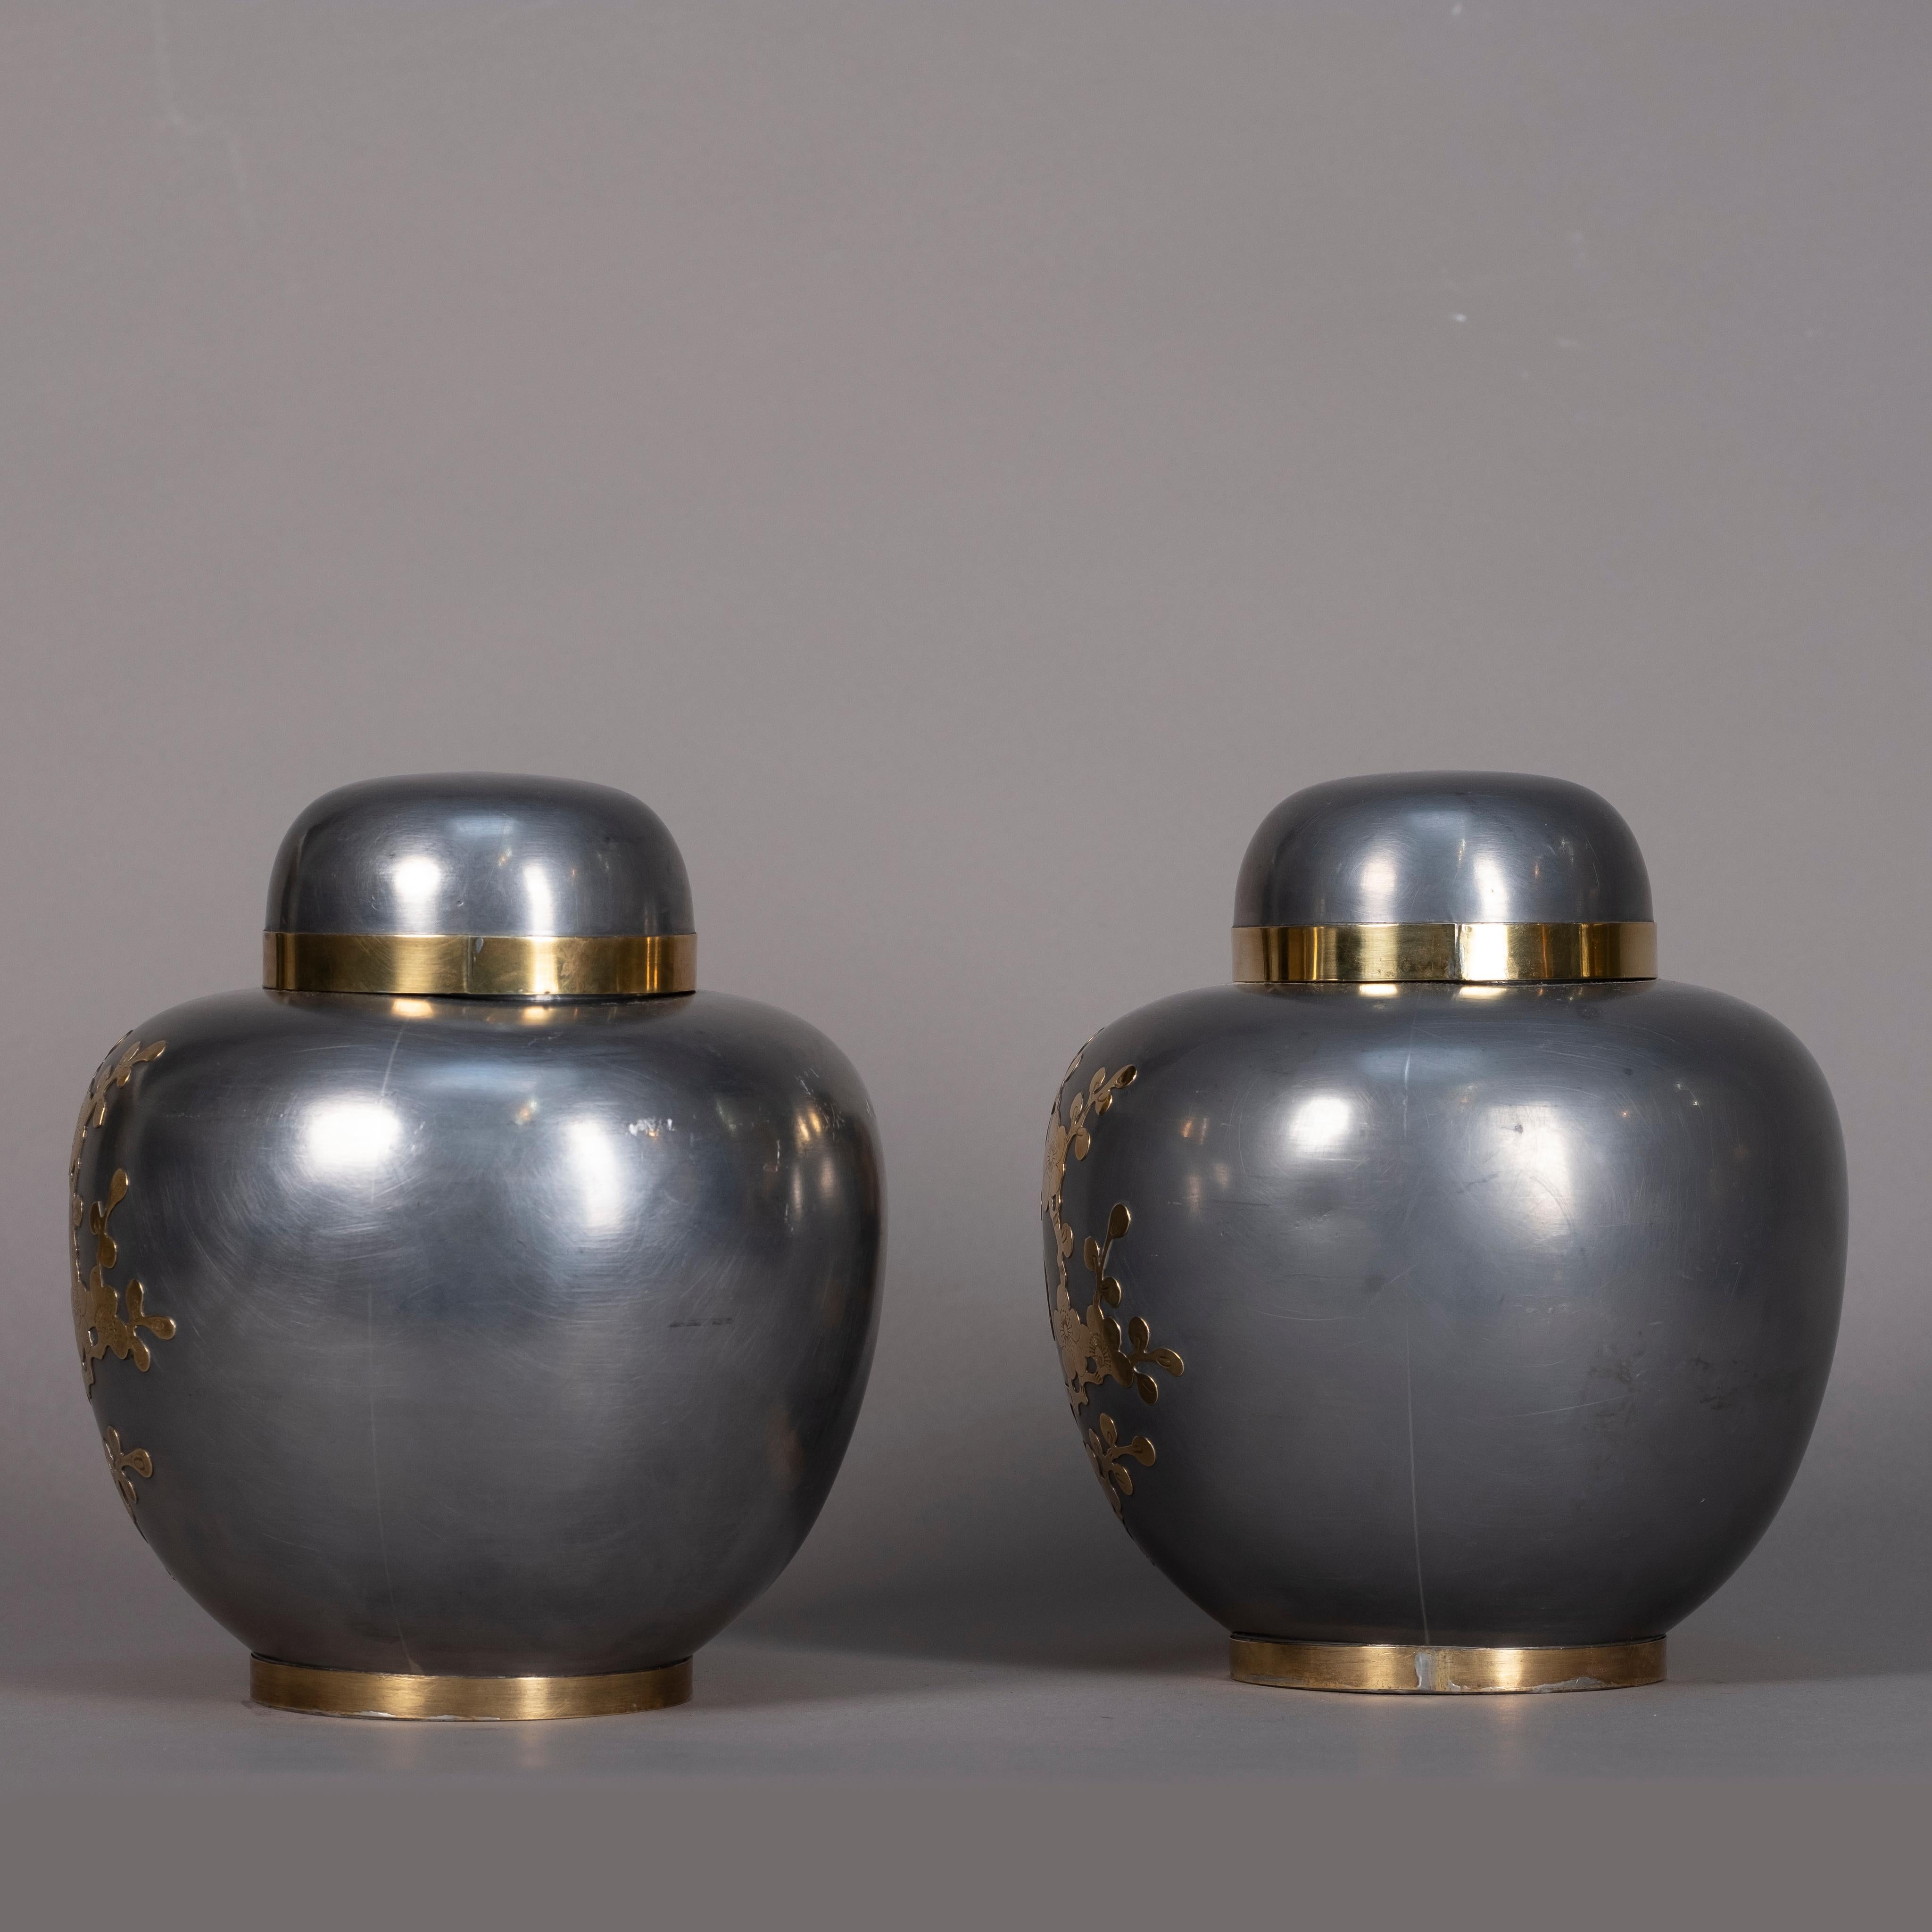 Chinese Export Pair of Mid-20th Century Pewter and Brass Ginger Jars